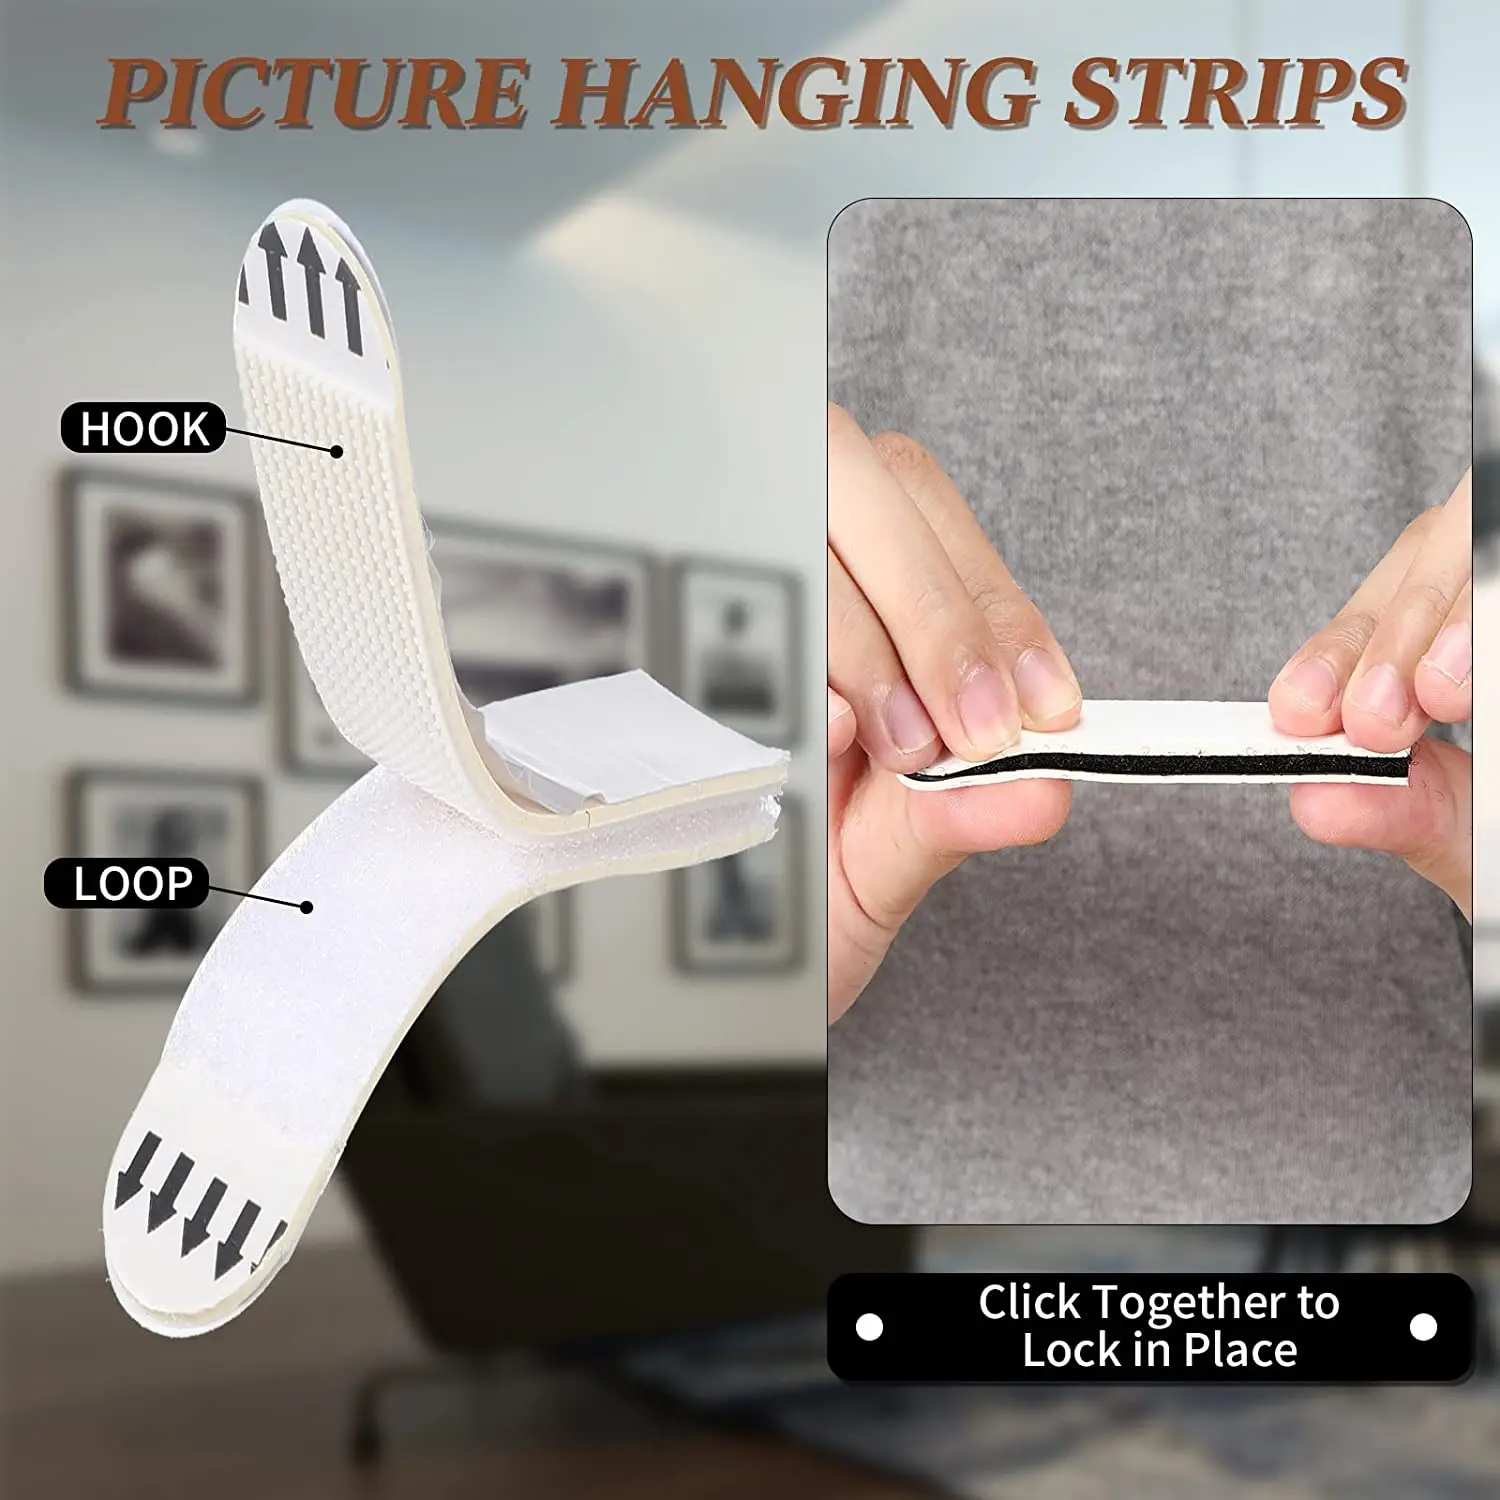 https://ae01.alicdn.com/kf/Hfa81de373a1f475ba611041613c69be3h/24-group-S-L-White-Tape-Damage-Free-Picture-Frame-Hanging-Strips-Wall-Sticker-Hook-Value.jpg